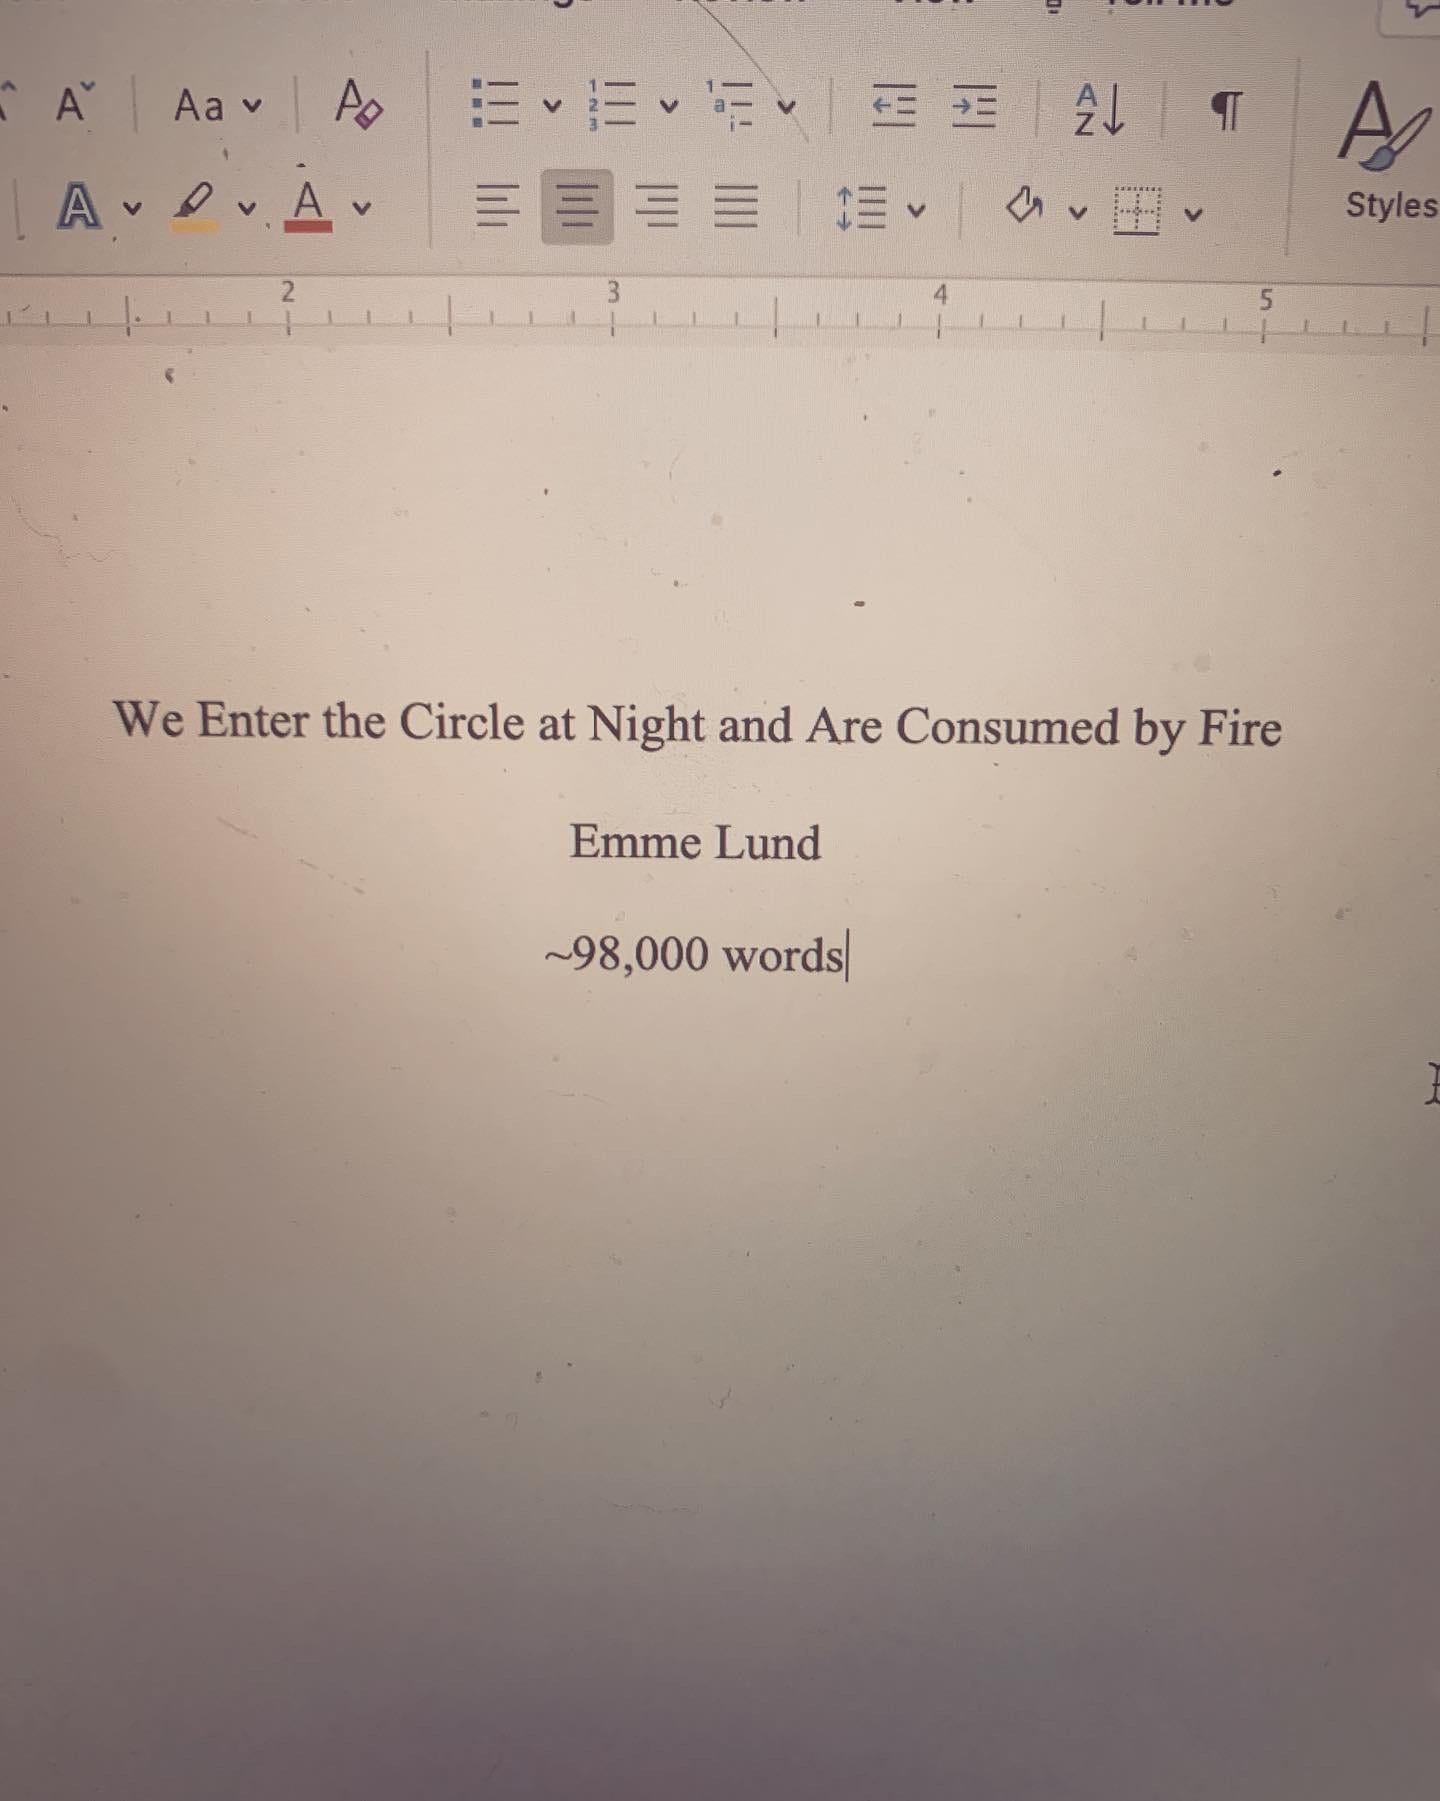 An image of a title page in Microsoft word reads: We Enter the Circle at Night and are Consumed by Fire. Emme Lund ~98,000 words